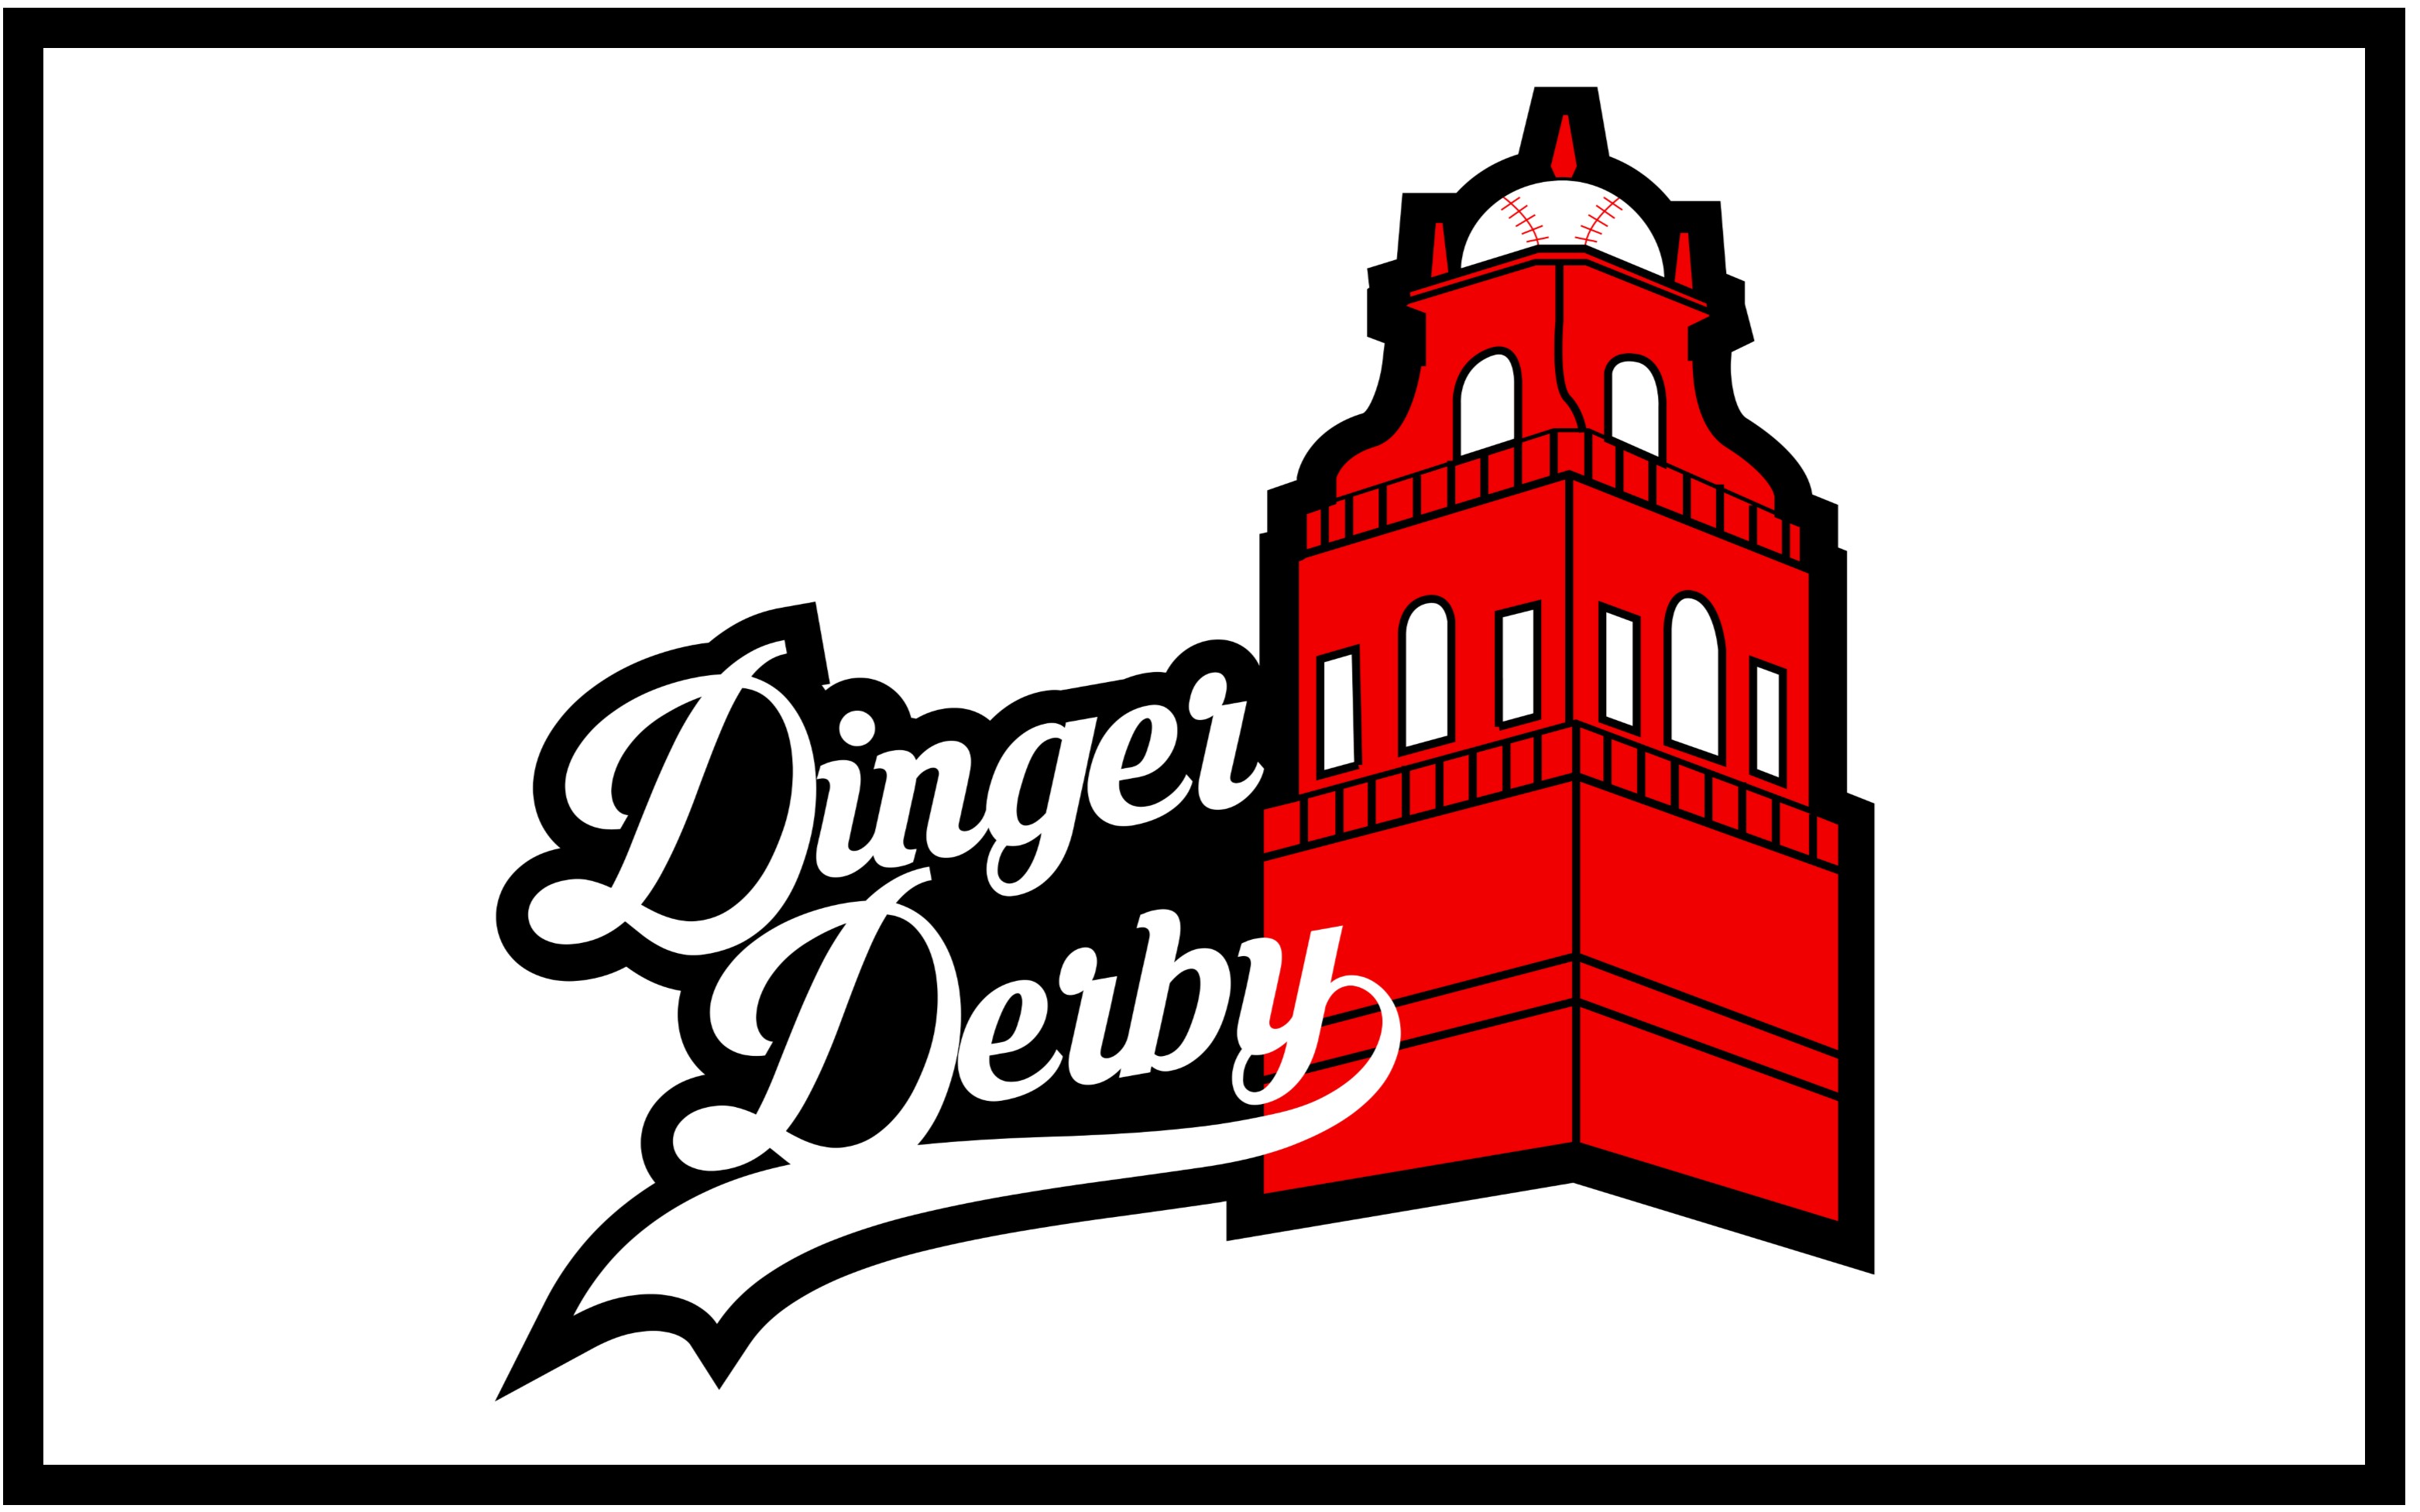 Fall Recap & Schedule With Gus & George | Dinger Derby Podcast